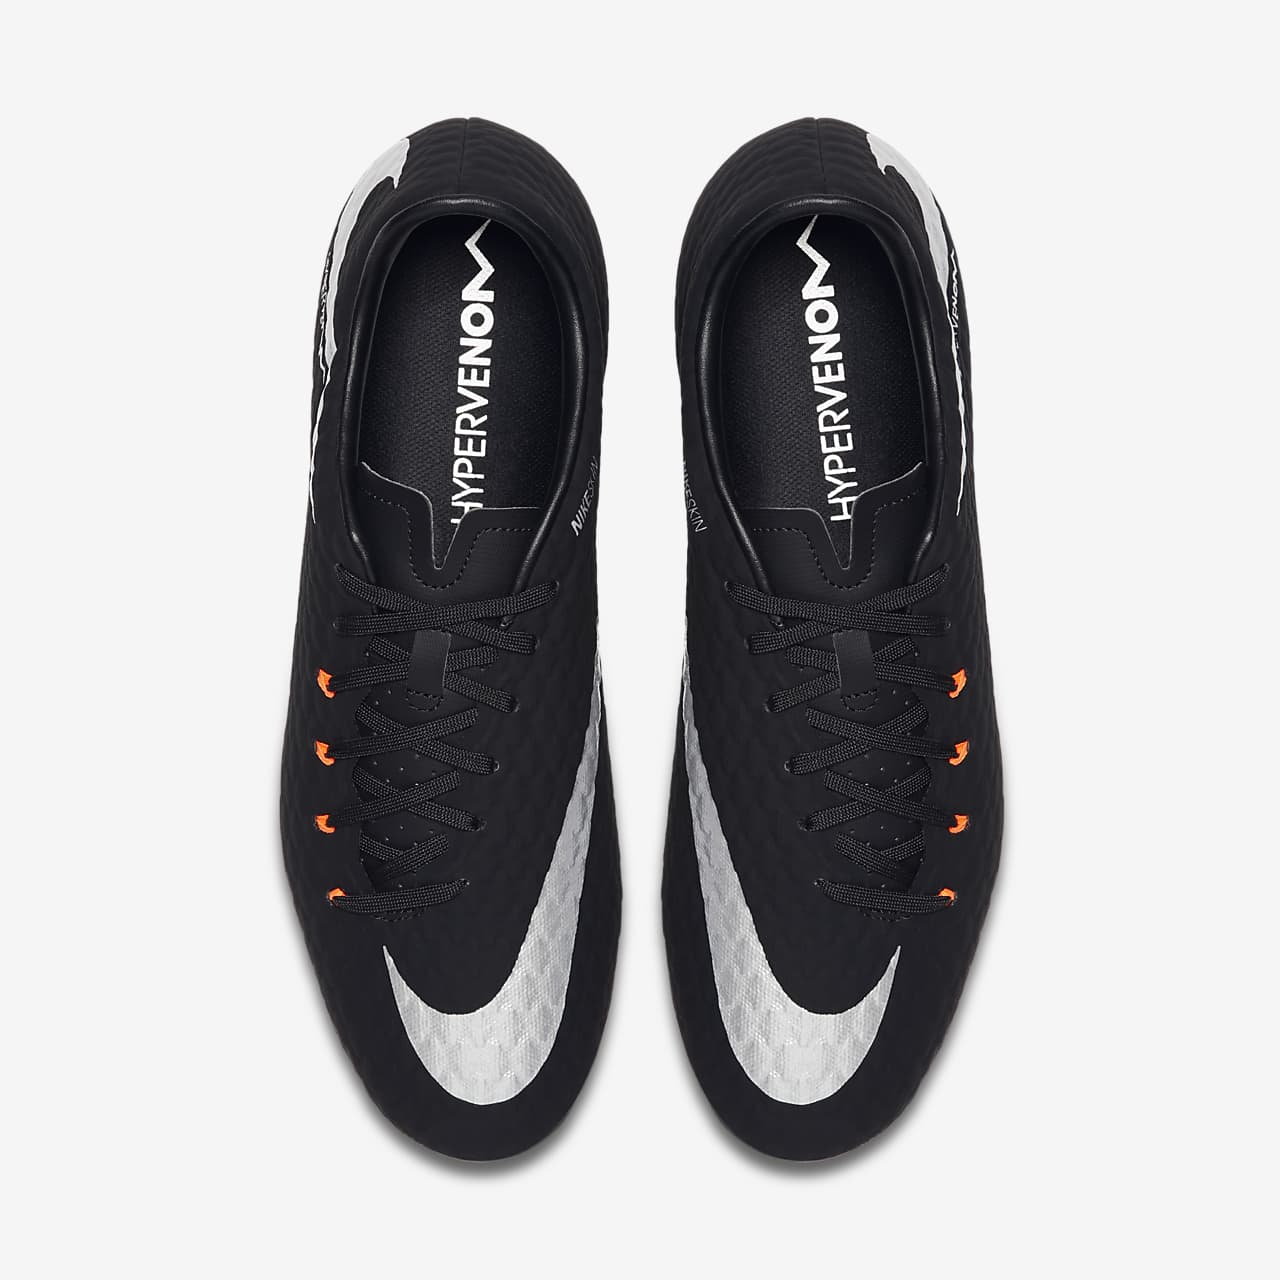 Uitwisseling Cilia Torrent Nike Hypervenom Phelon 3 AG-PRO Artificial-Grass Football Boot. Nike IN